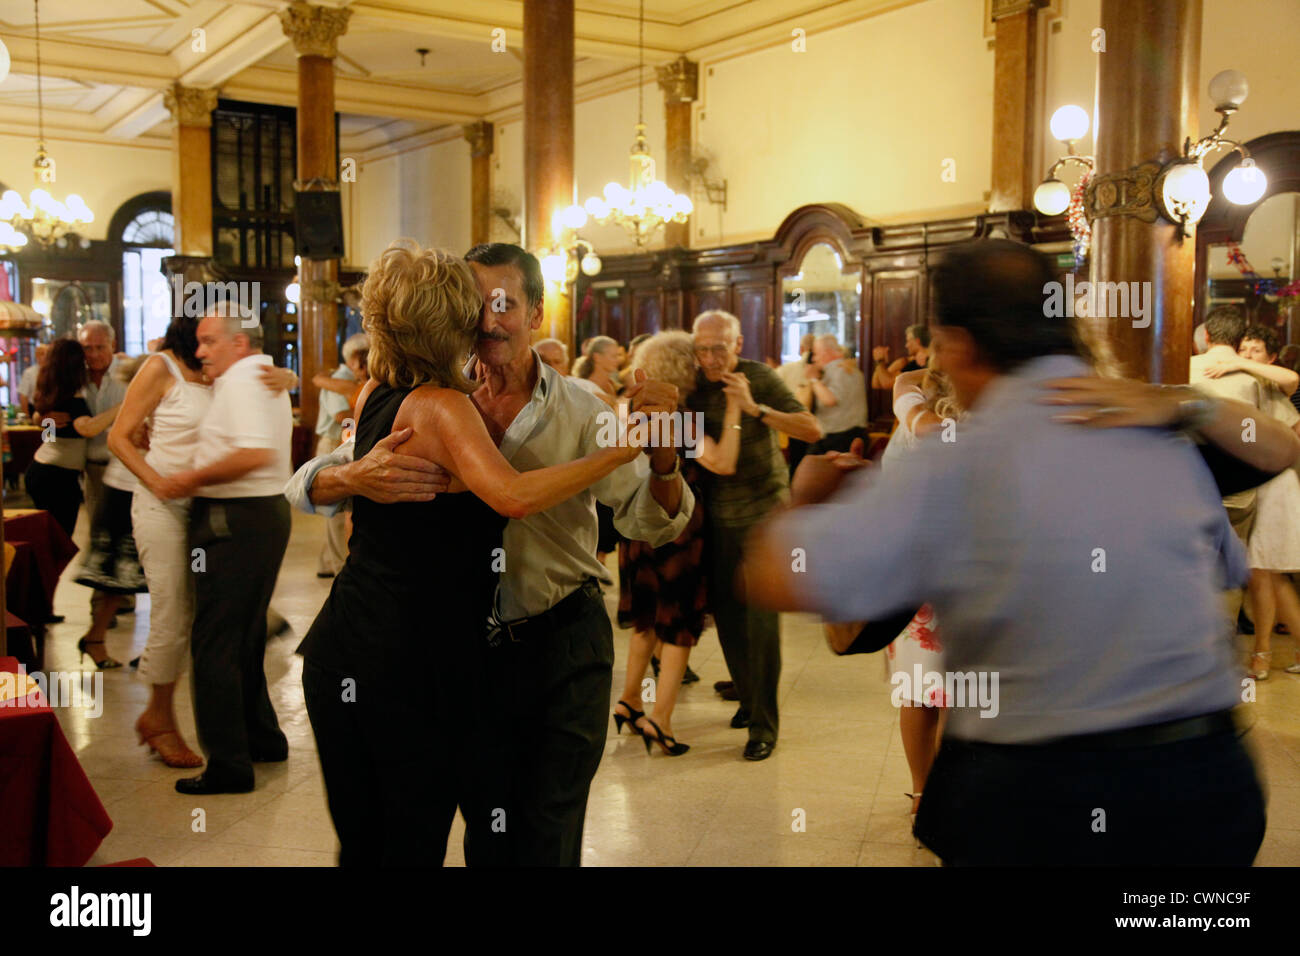 People dancing tango at Confiteria Ideal, Buenos Aires, Argentina. Stock Photo